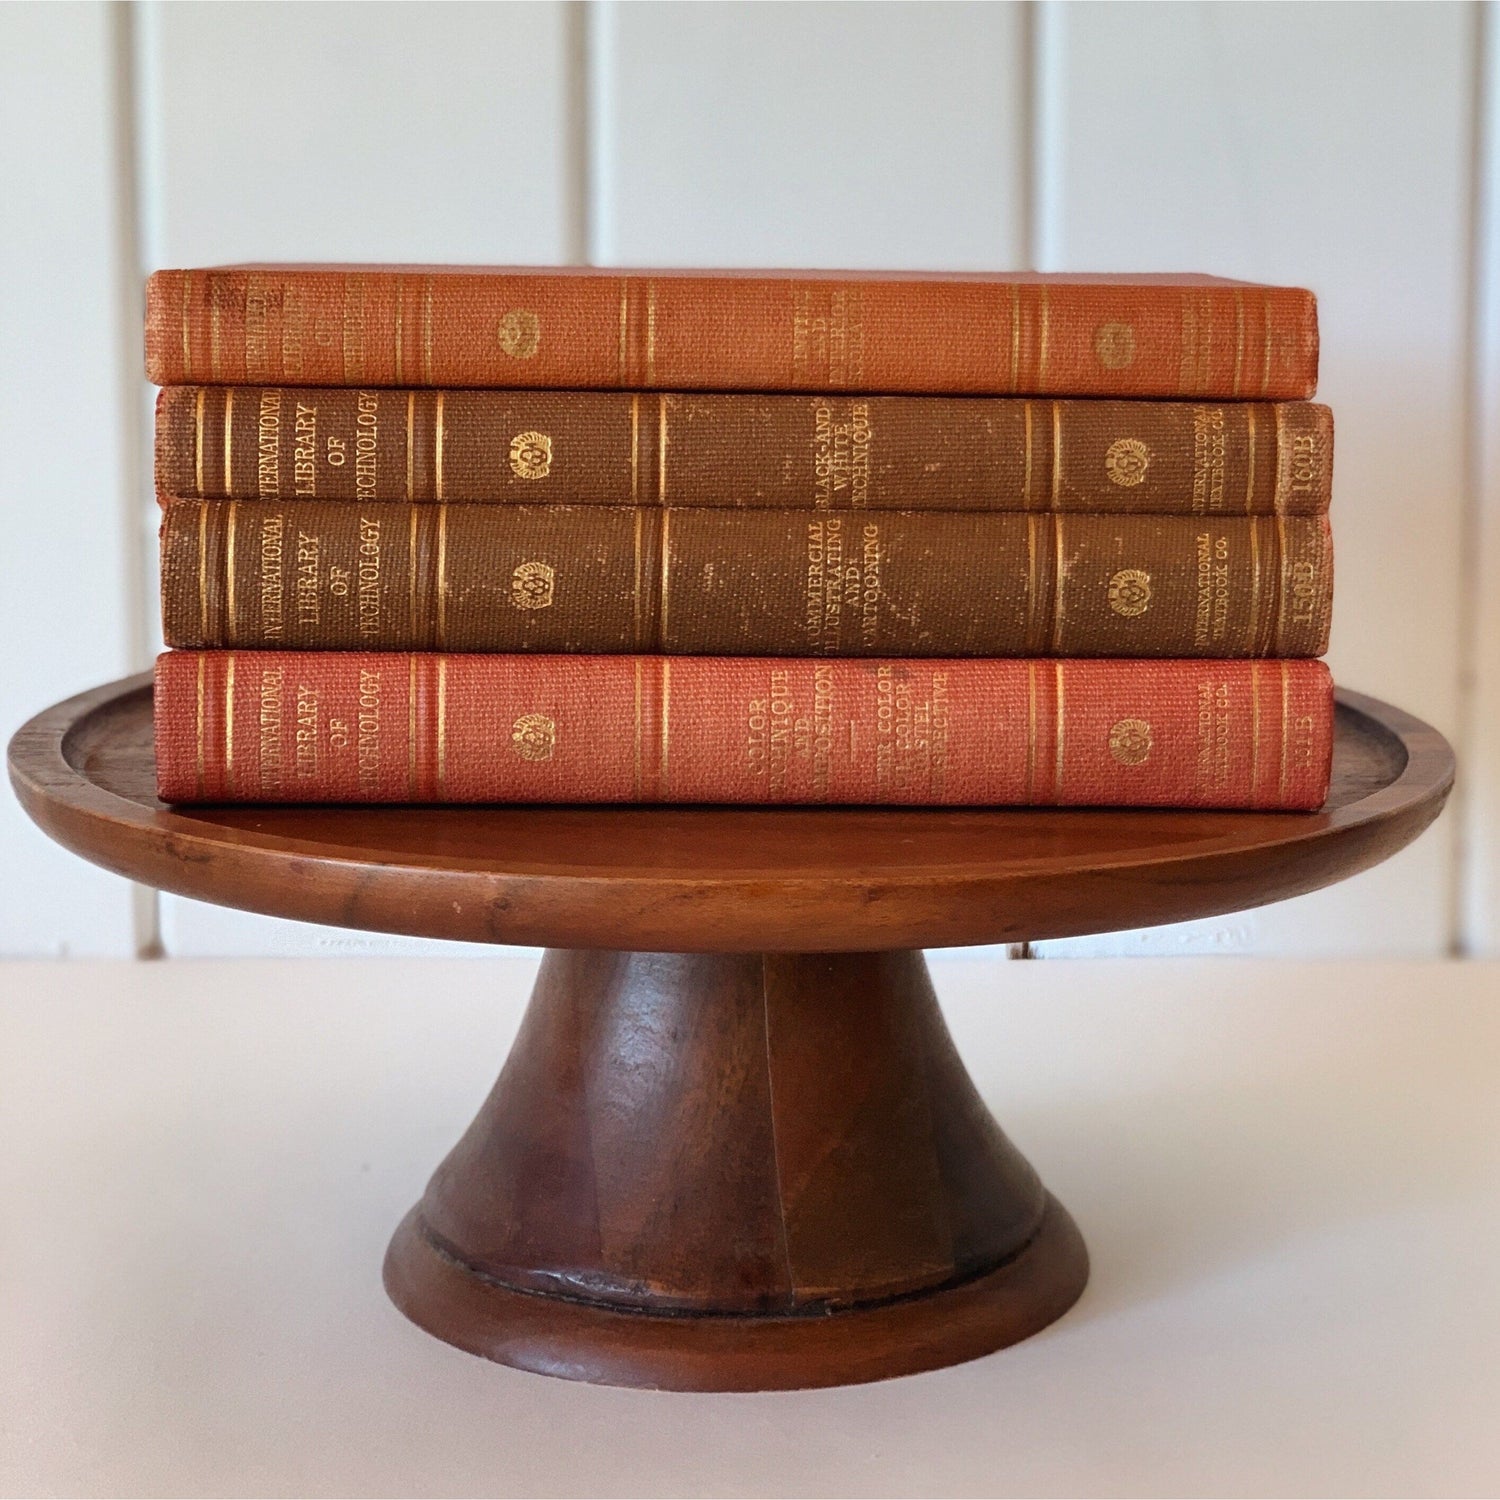 International Library of Technology Antique Red Book Set, Art Instruction Books